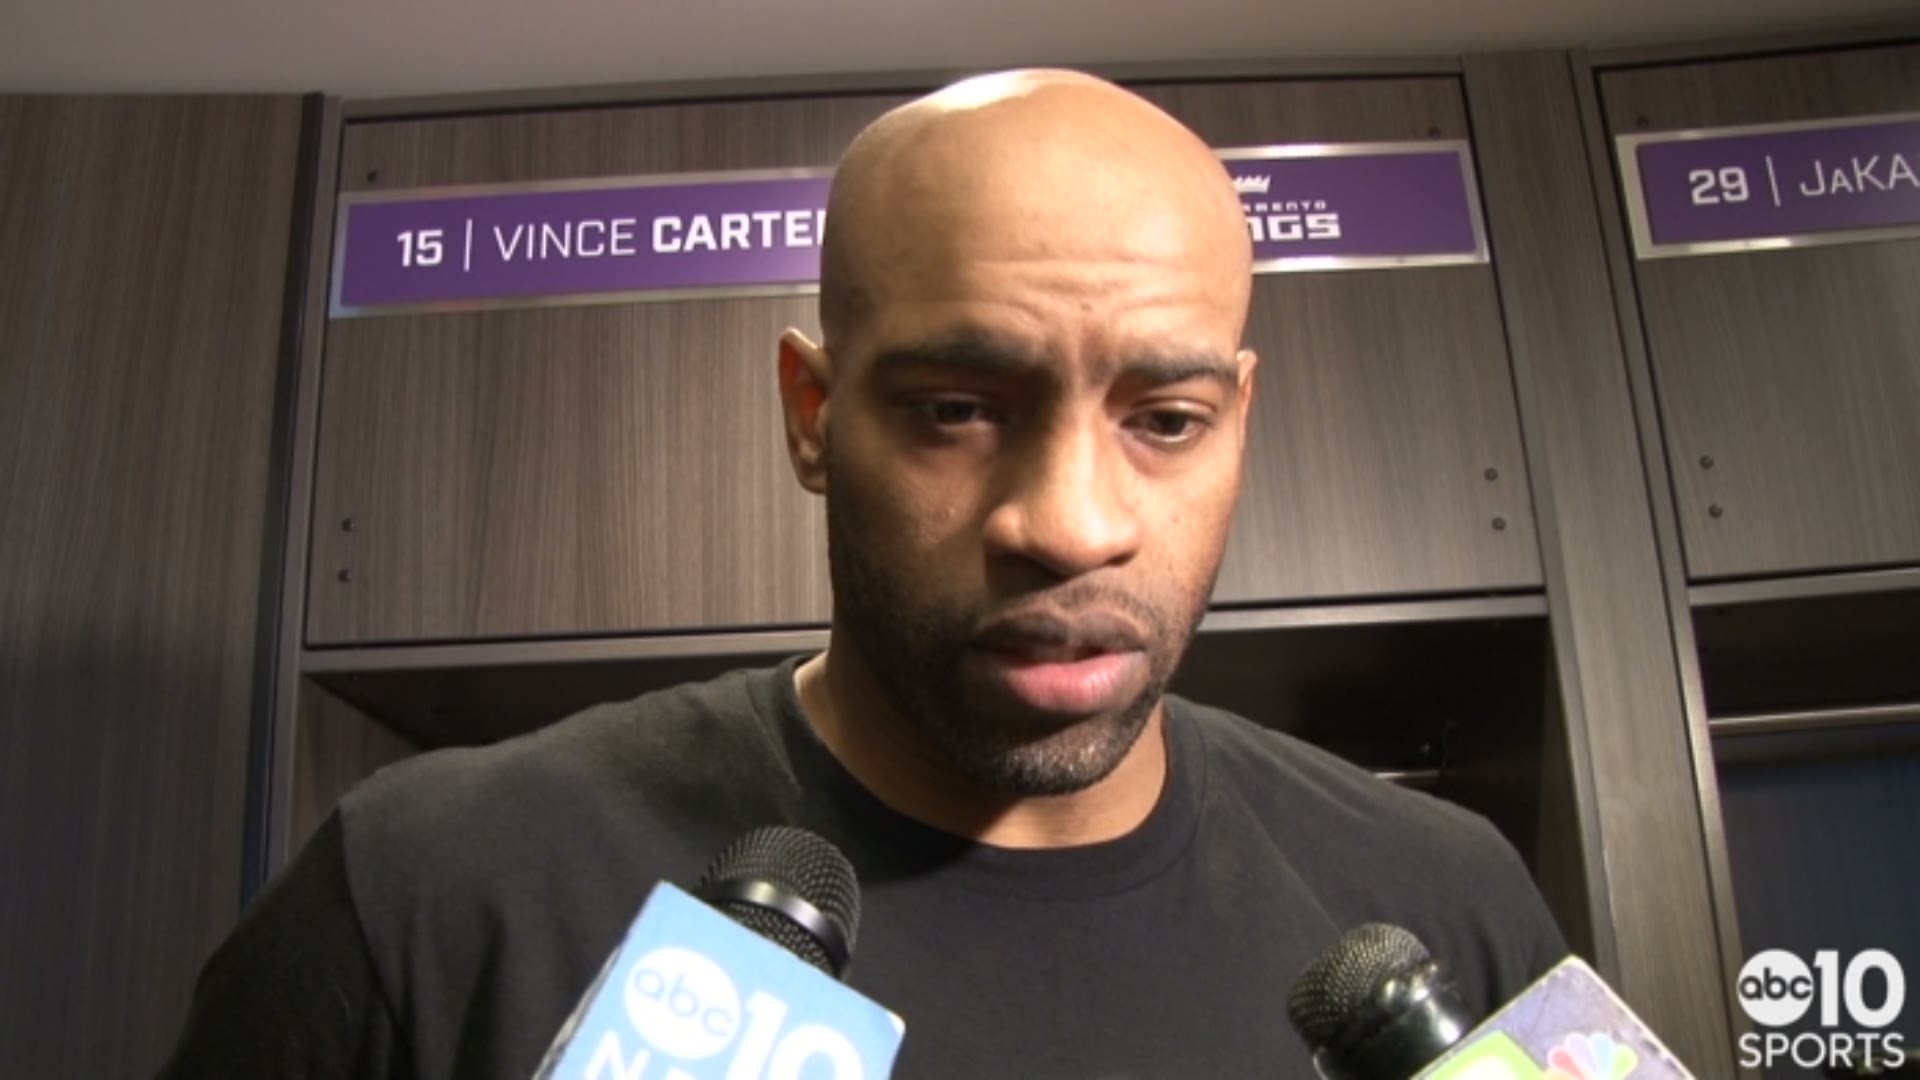 Kings forward Vince Carter discusses playing in Thursday's game in Sacramento against the Hawks while protests for the police shooting death of Stephon Clark were happening outside the Golden 1 Center.